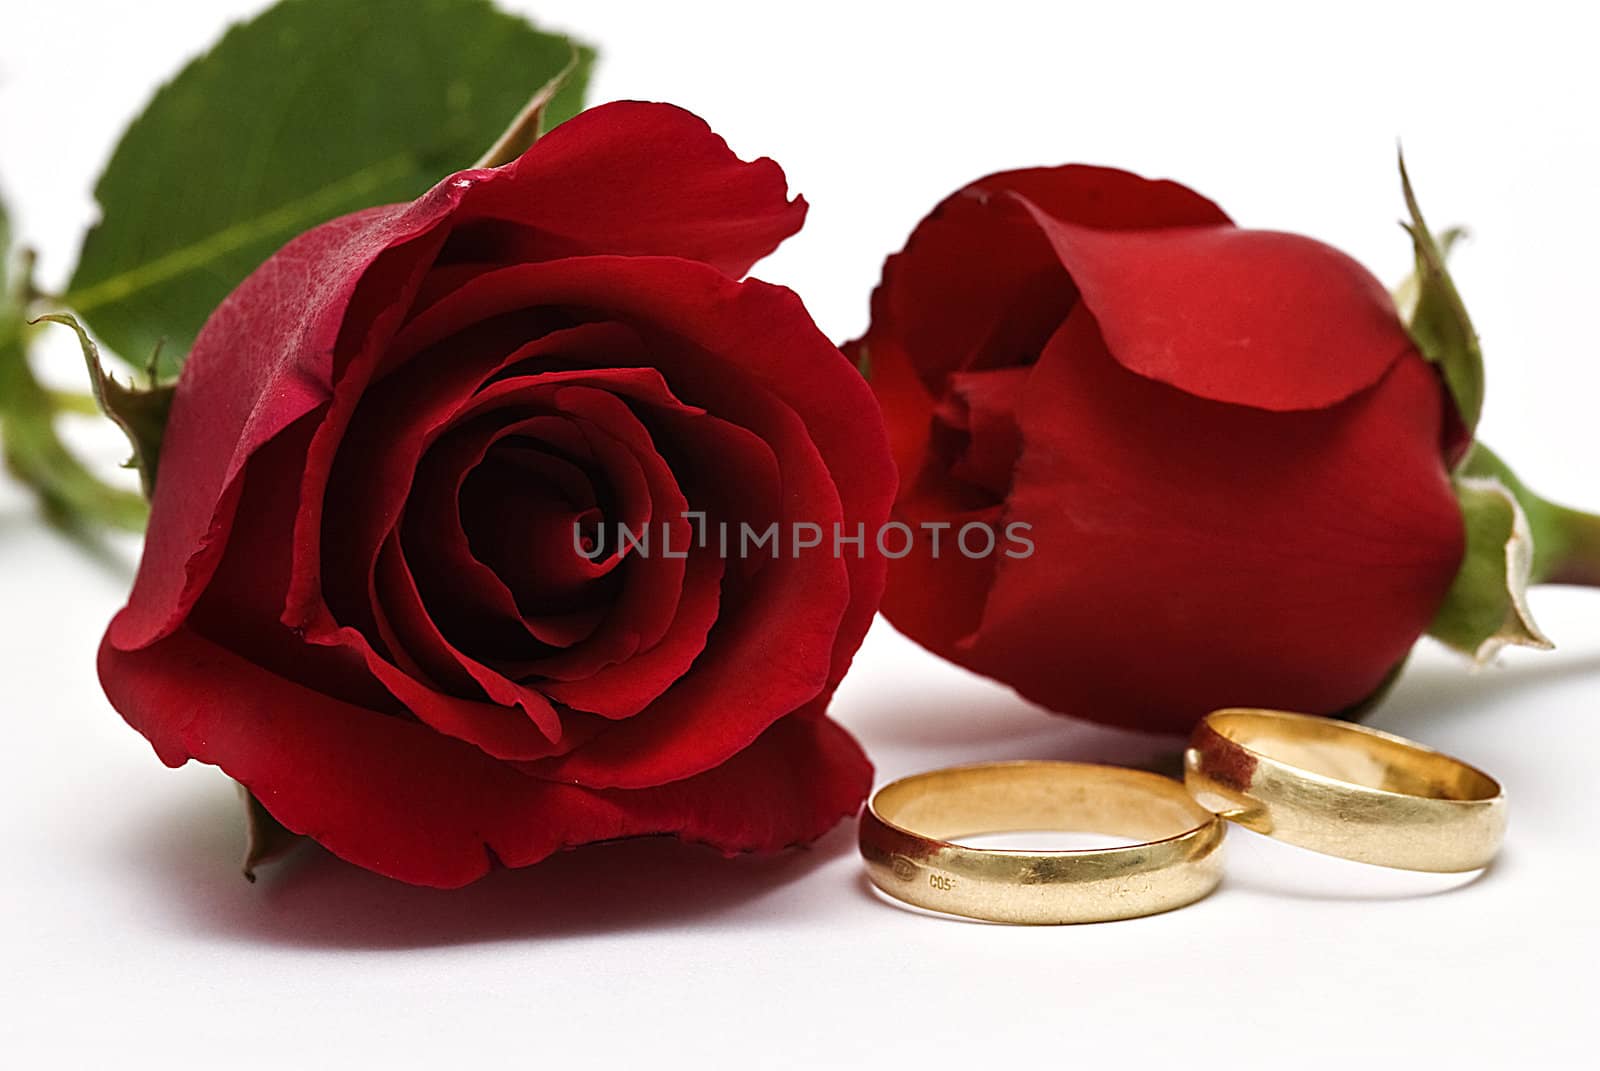 Wedding rings and red roses. by angelsimon